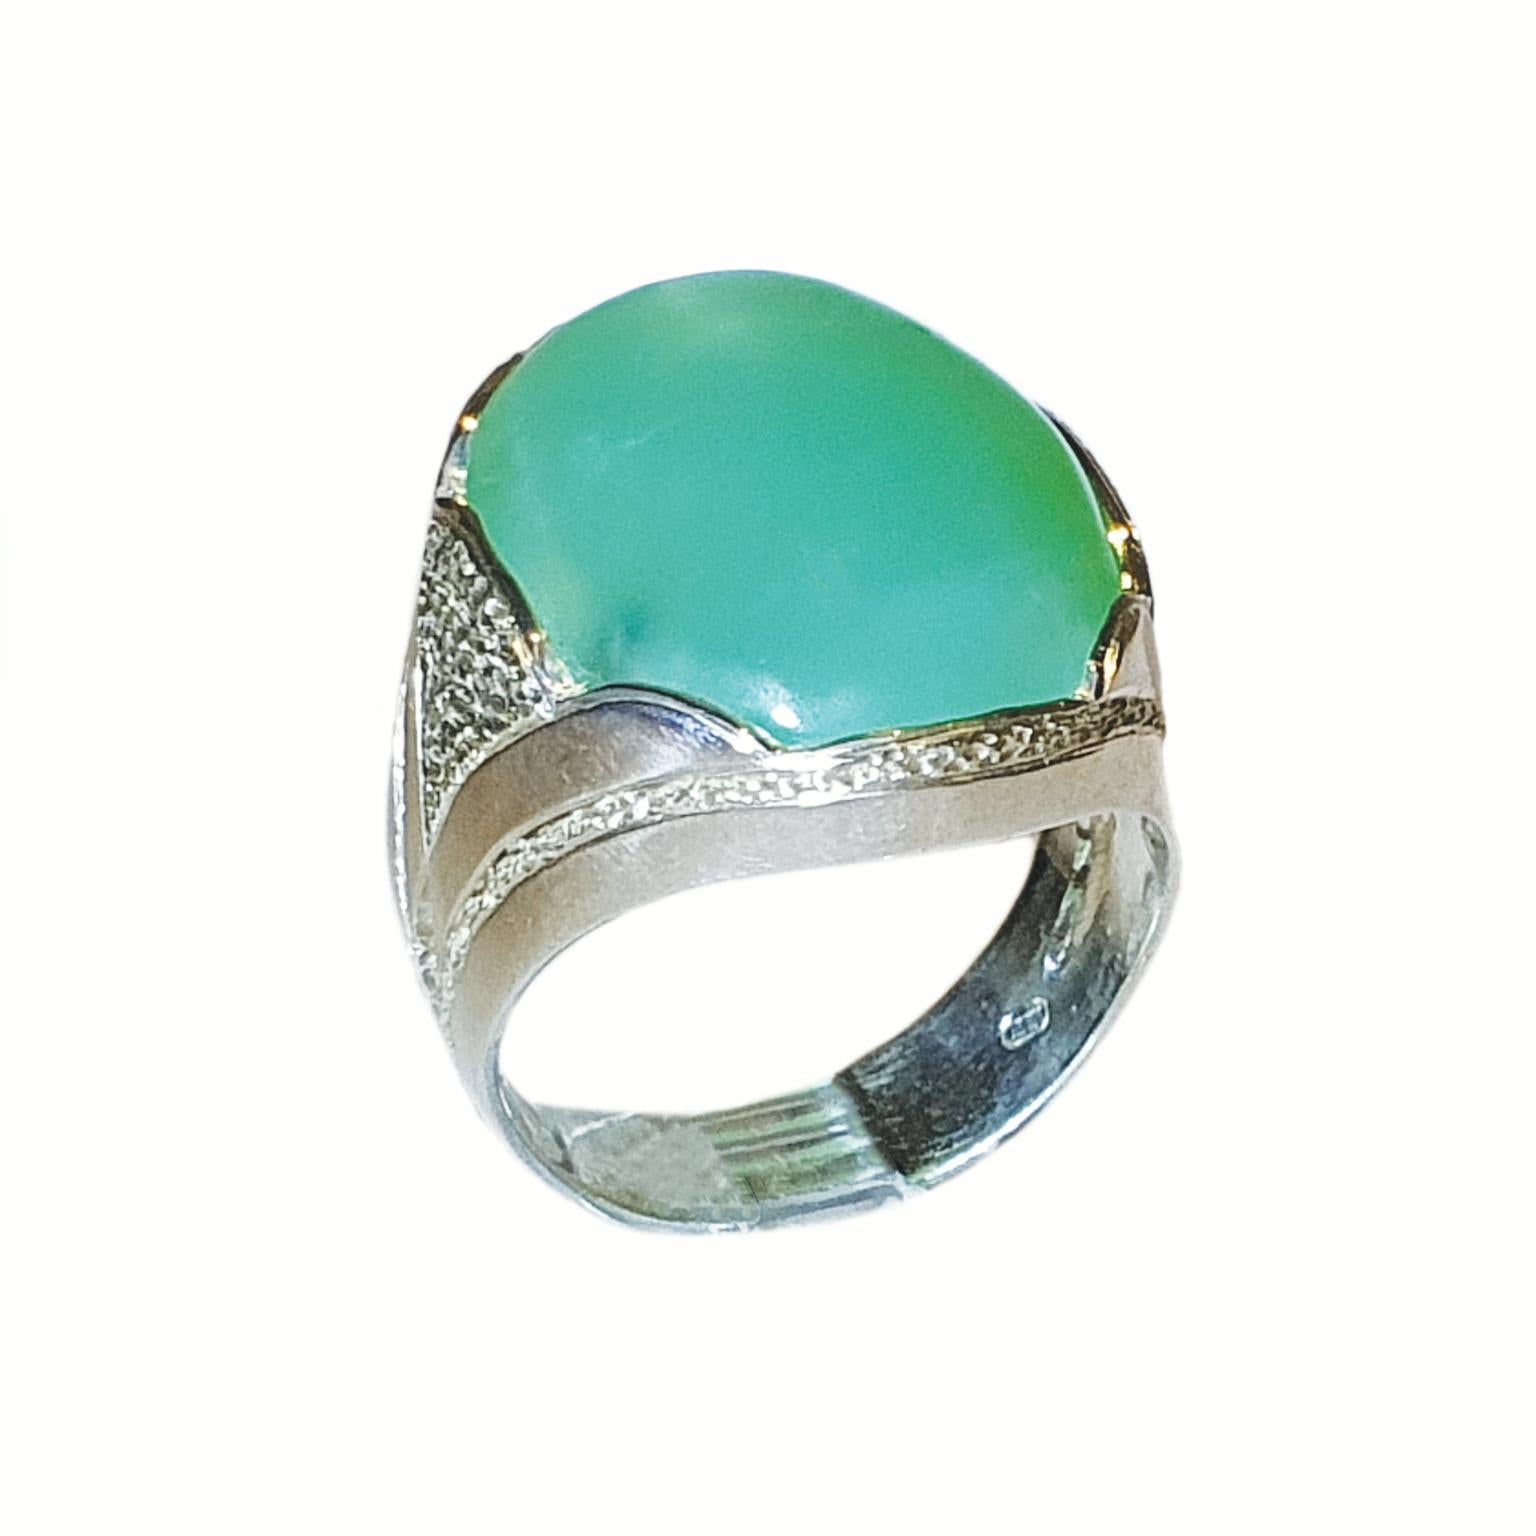 Paul Amey’s Chrysoprase ring was crafted from tarnish resistant Sterling Silver. The ring features a natural 25mm x 18.5mm oval Chrysoprase stone and is finished with Paul Amey’s hand engraved texture on the band. The ring weights 11.2 grams and is